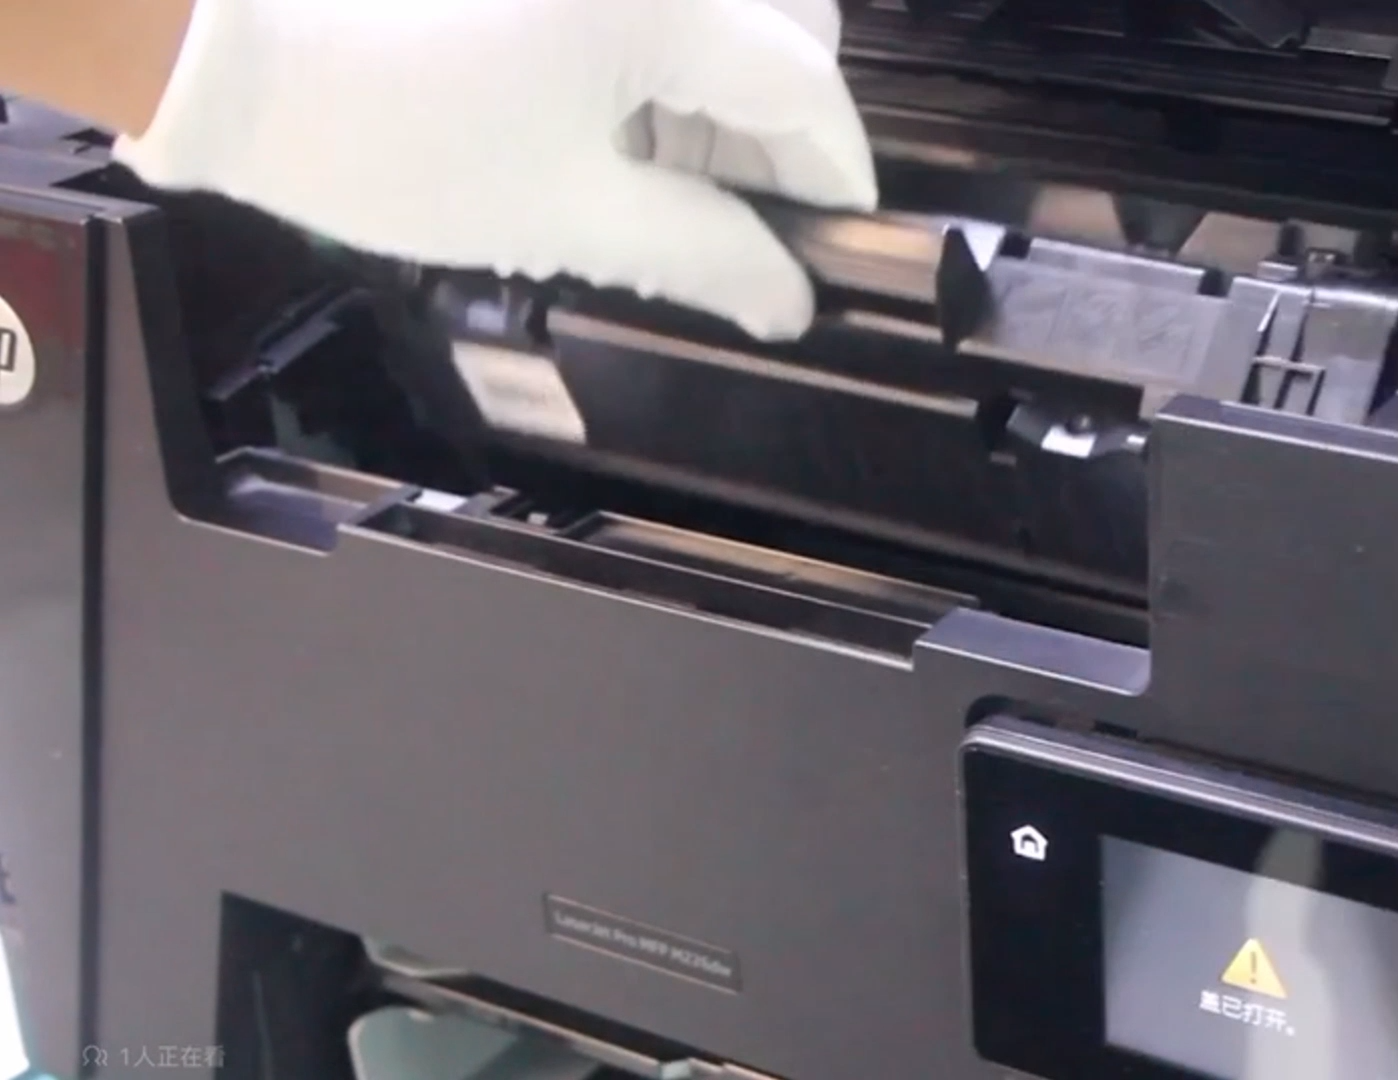 How to test and verify the,printer,toner cartridge chip